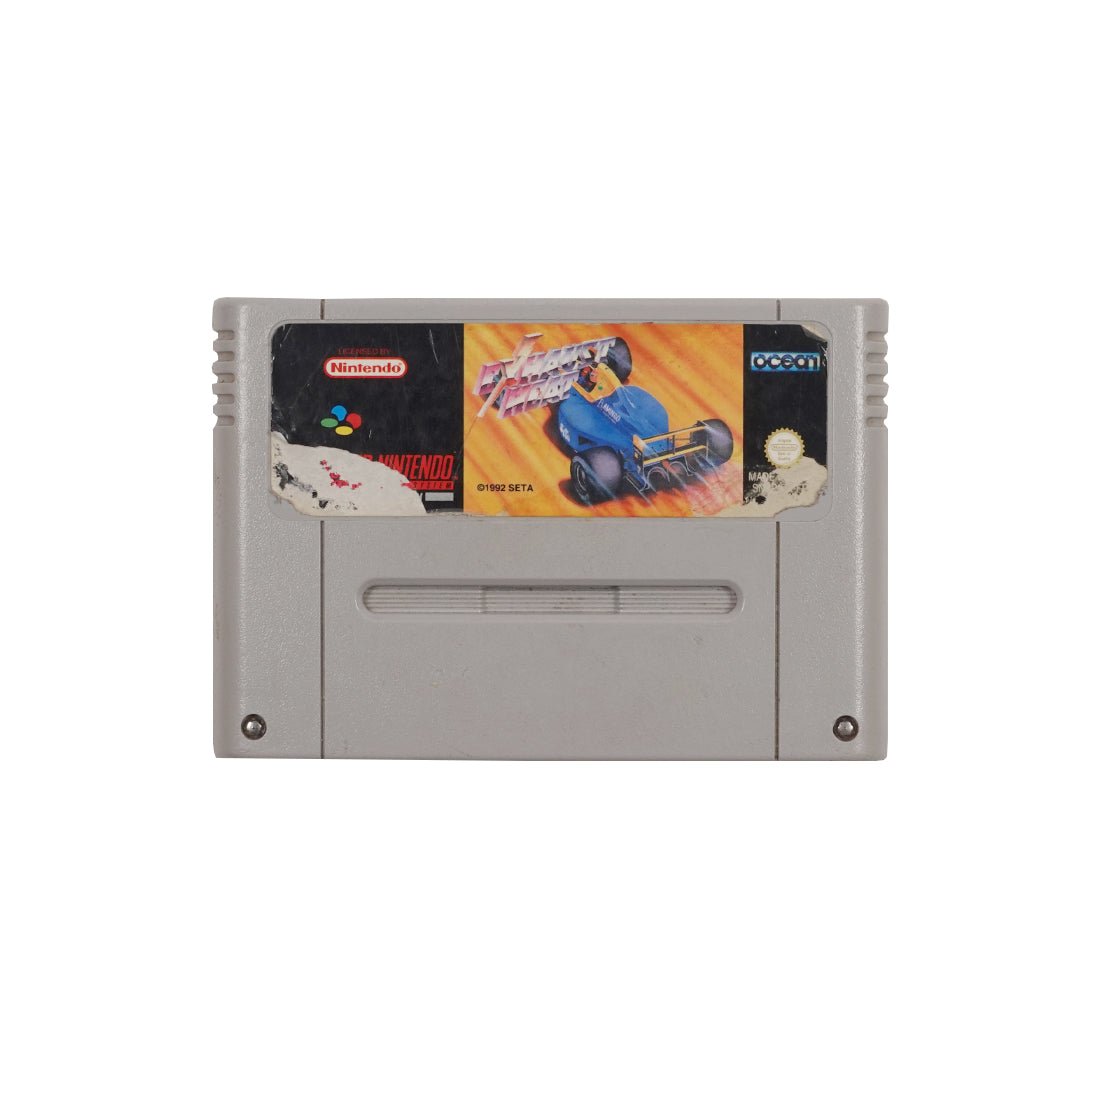 (Pre-Owned) Exhaust Heat - Super Nintendo Entertainment System - Store 974 | ستور ٩٧٤